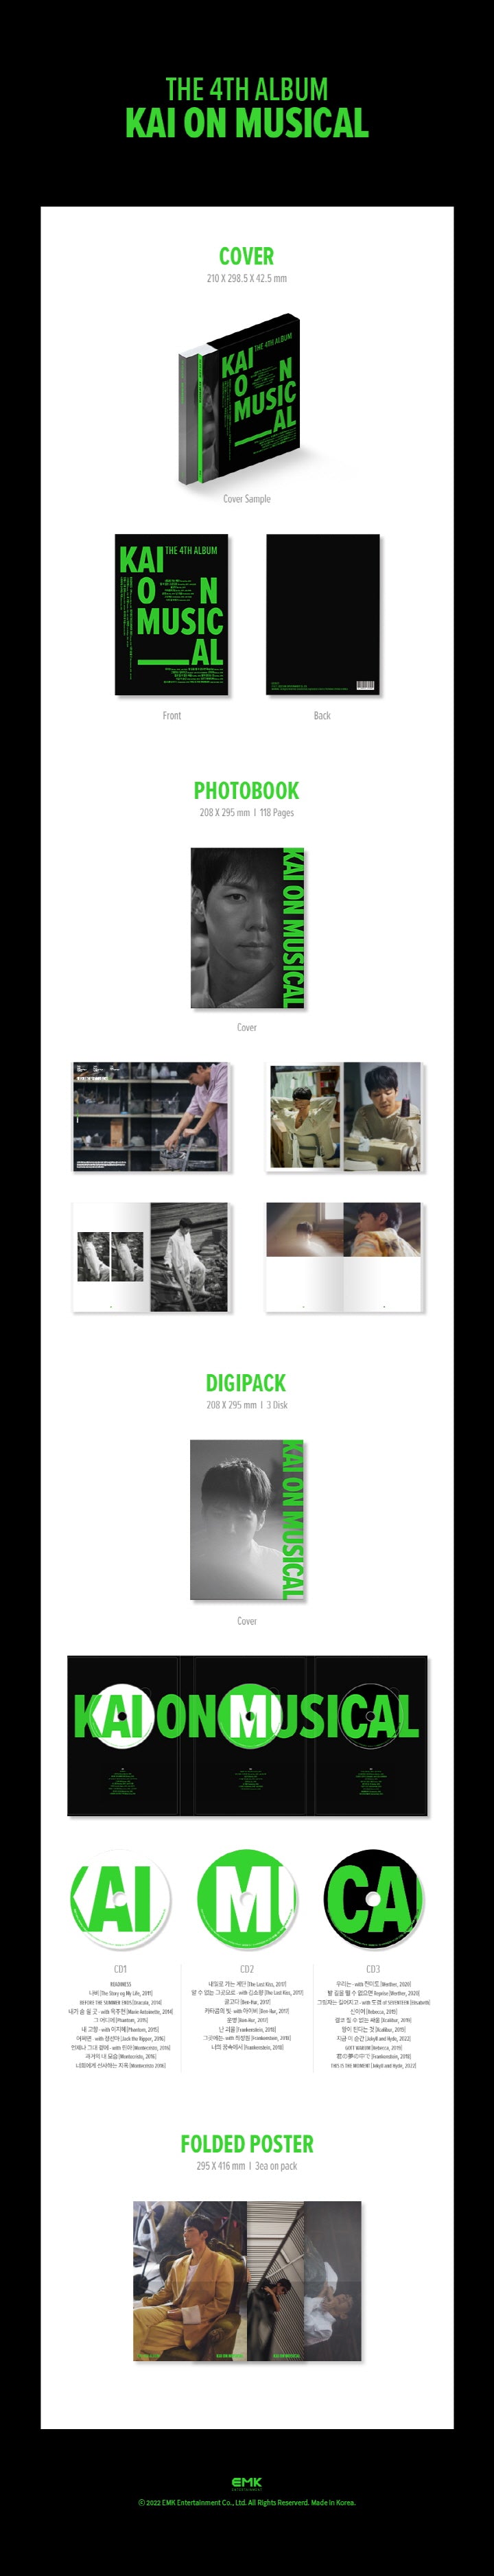 3 CDs
1 Photo Book (118 pages)
3 Folded Posters